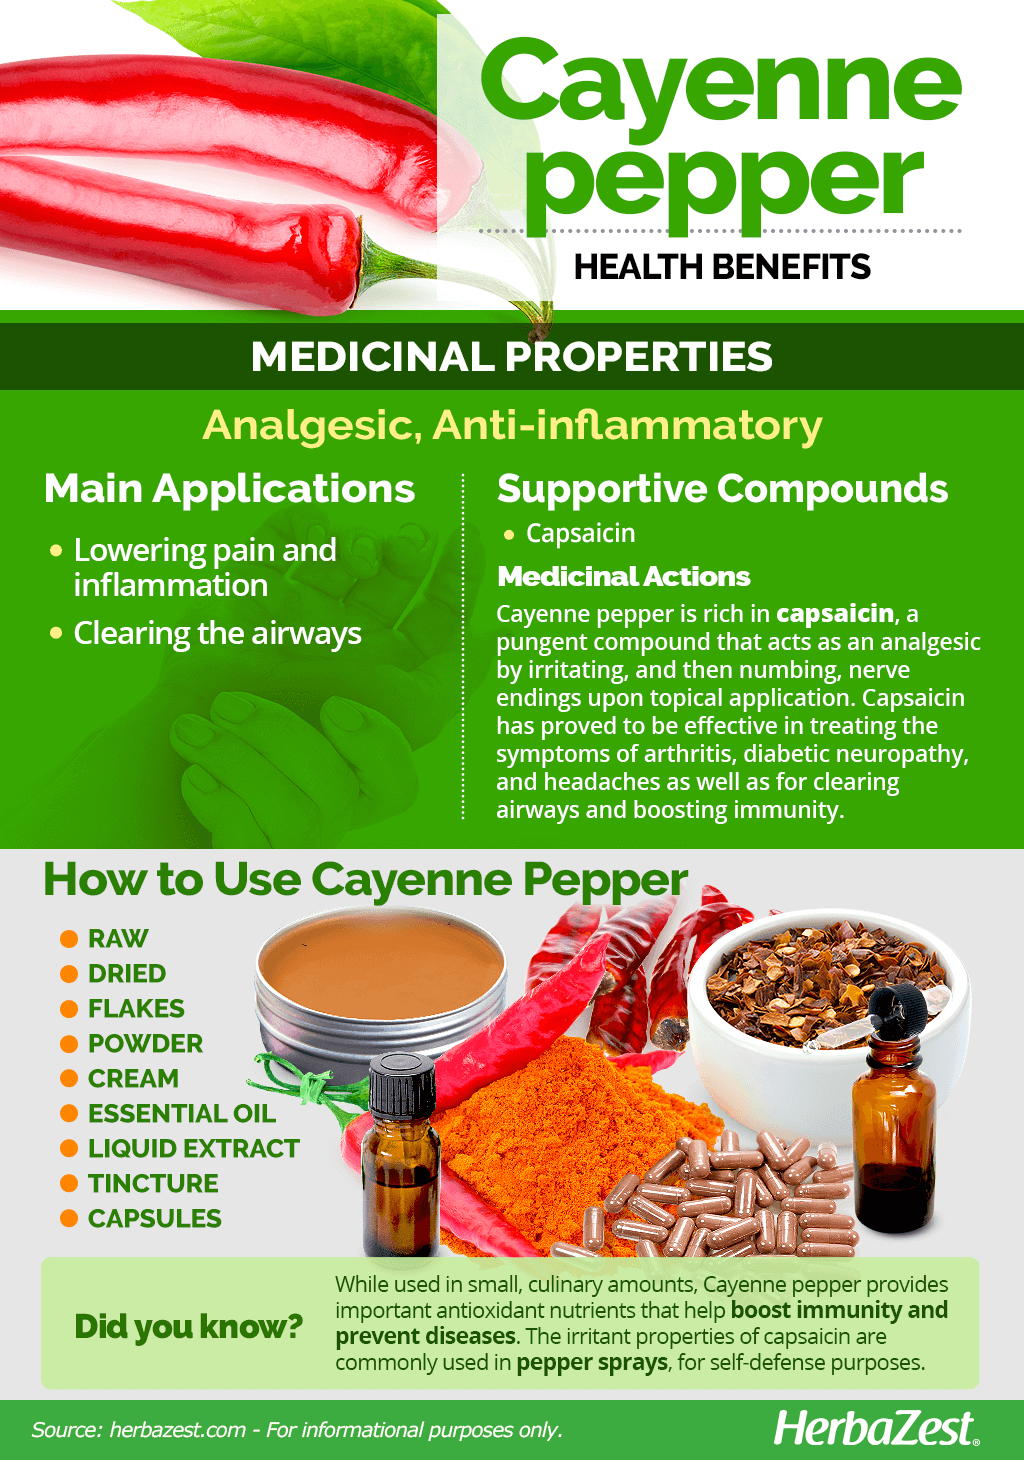 All About Cayenne pepper